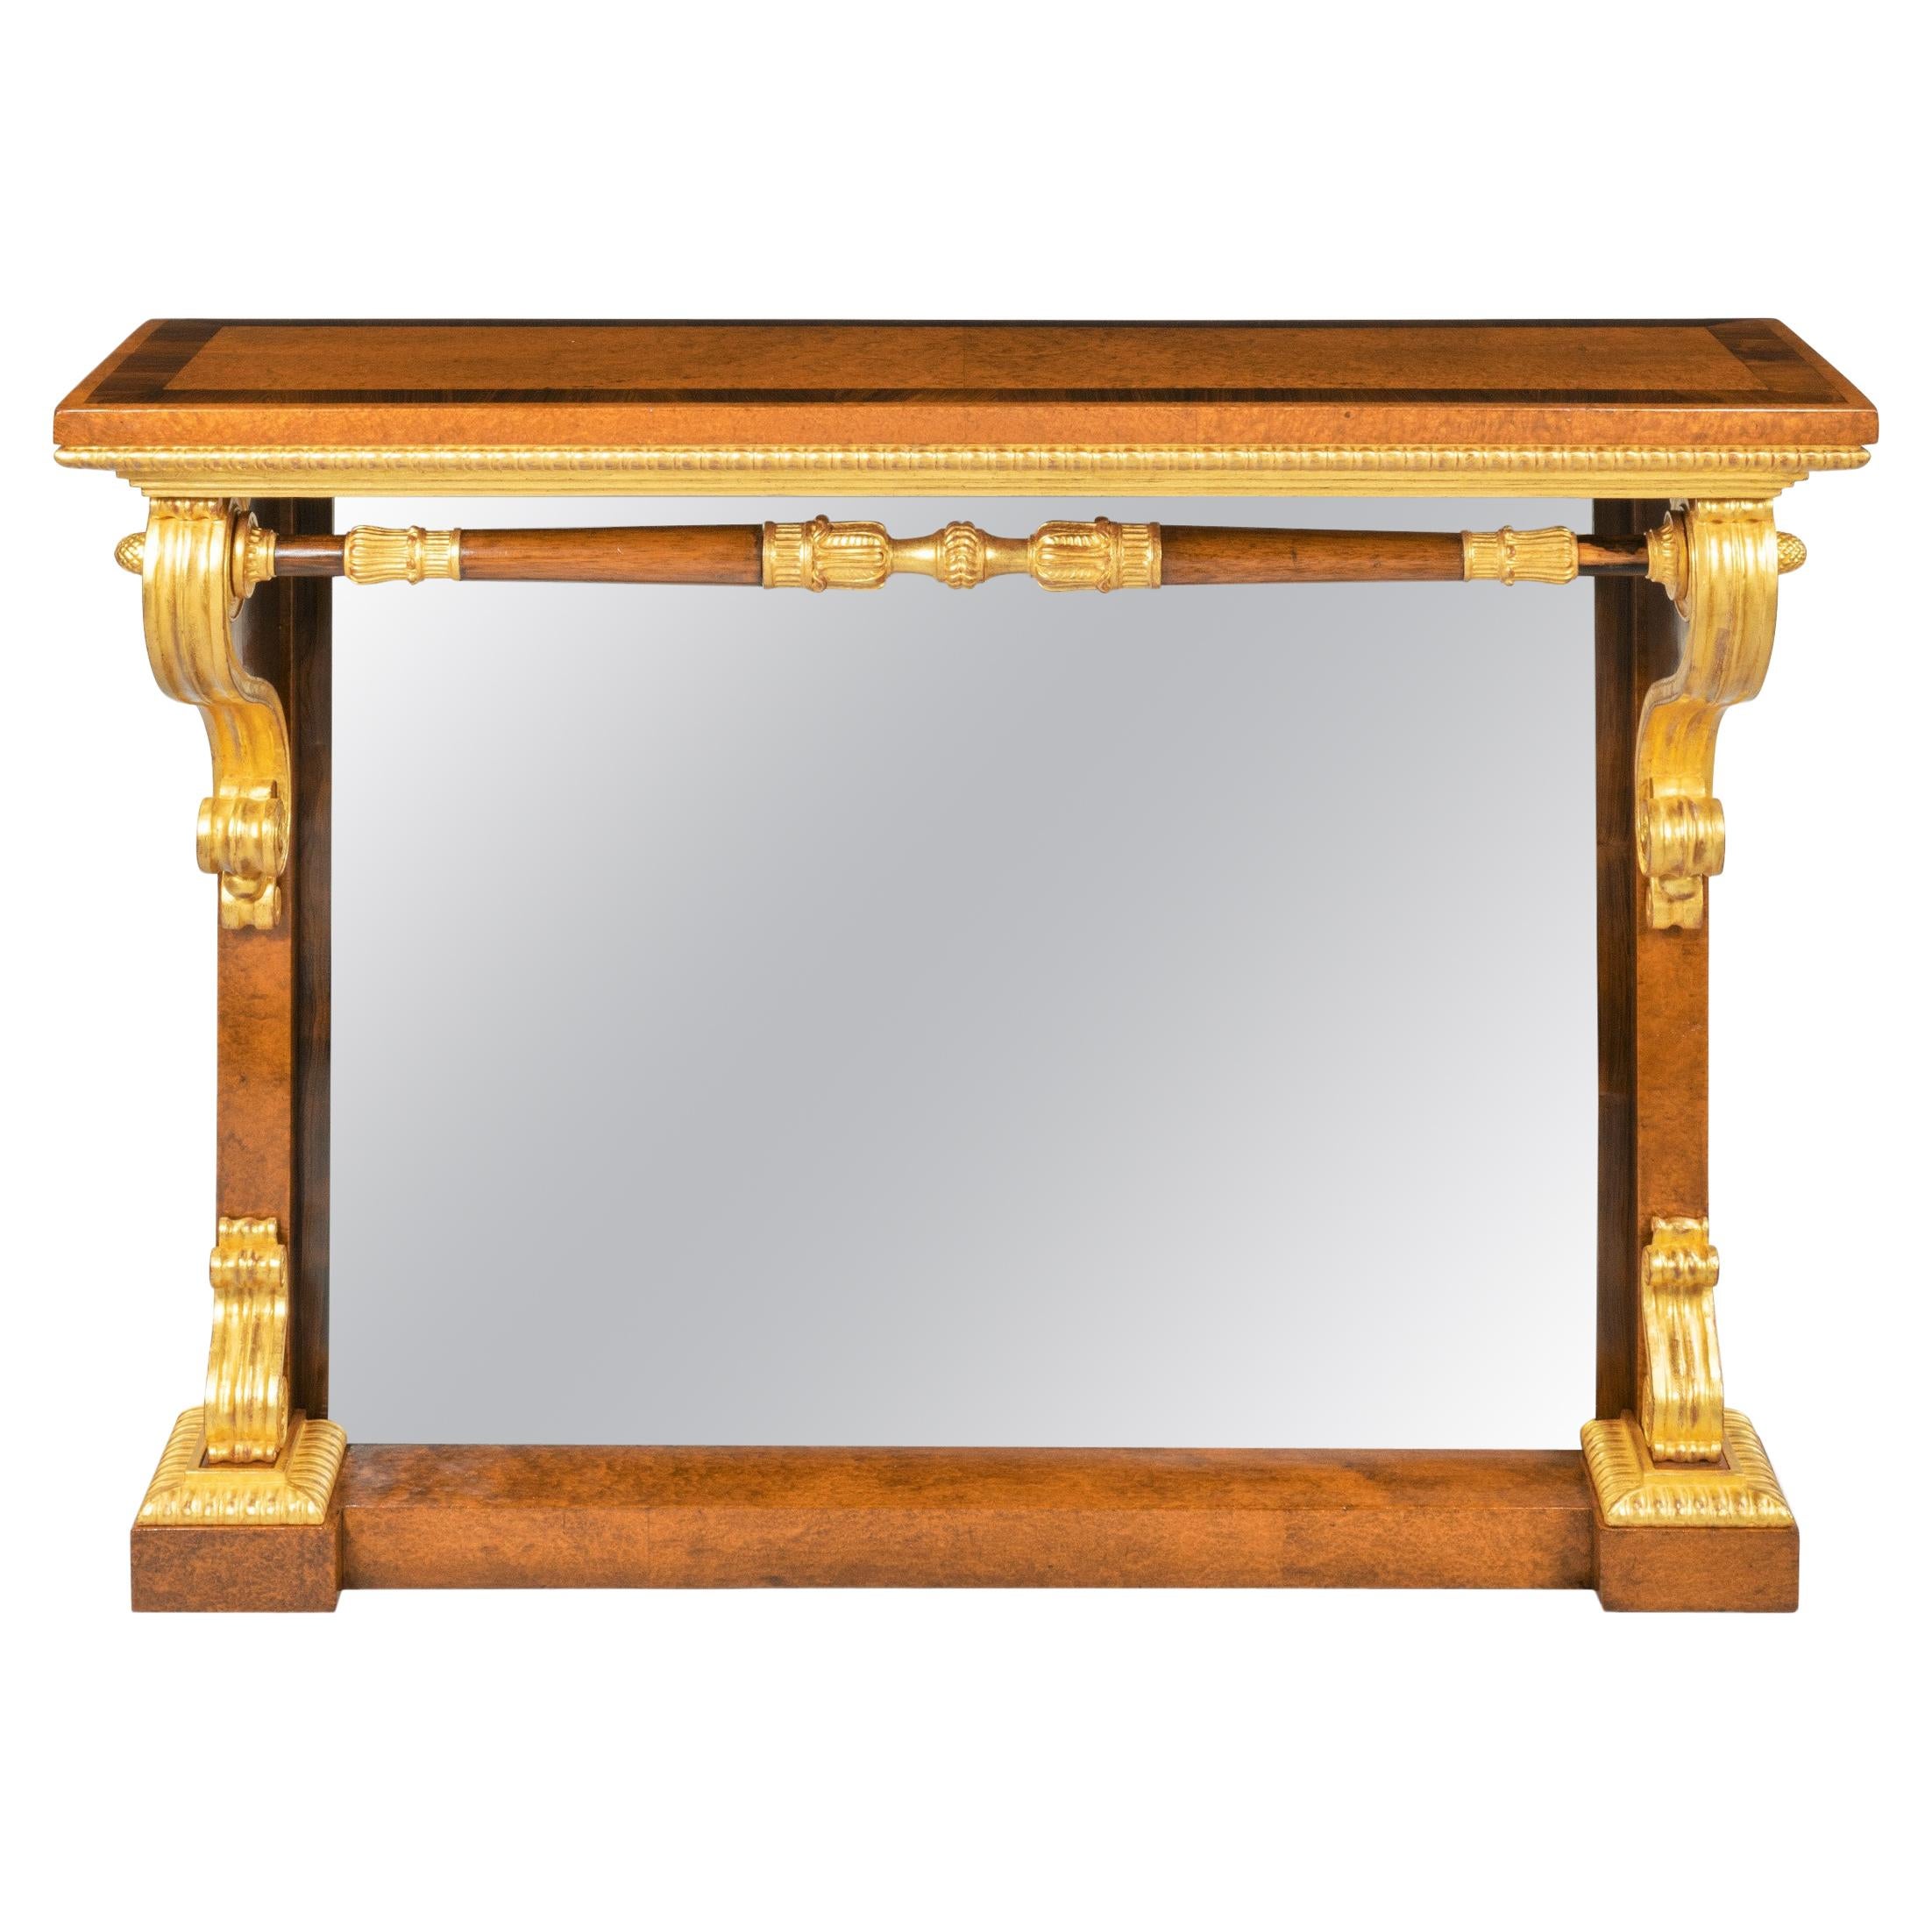 Striking George IV Amboyna, Rosewood and Gilt Console Table